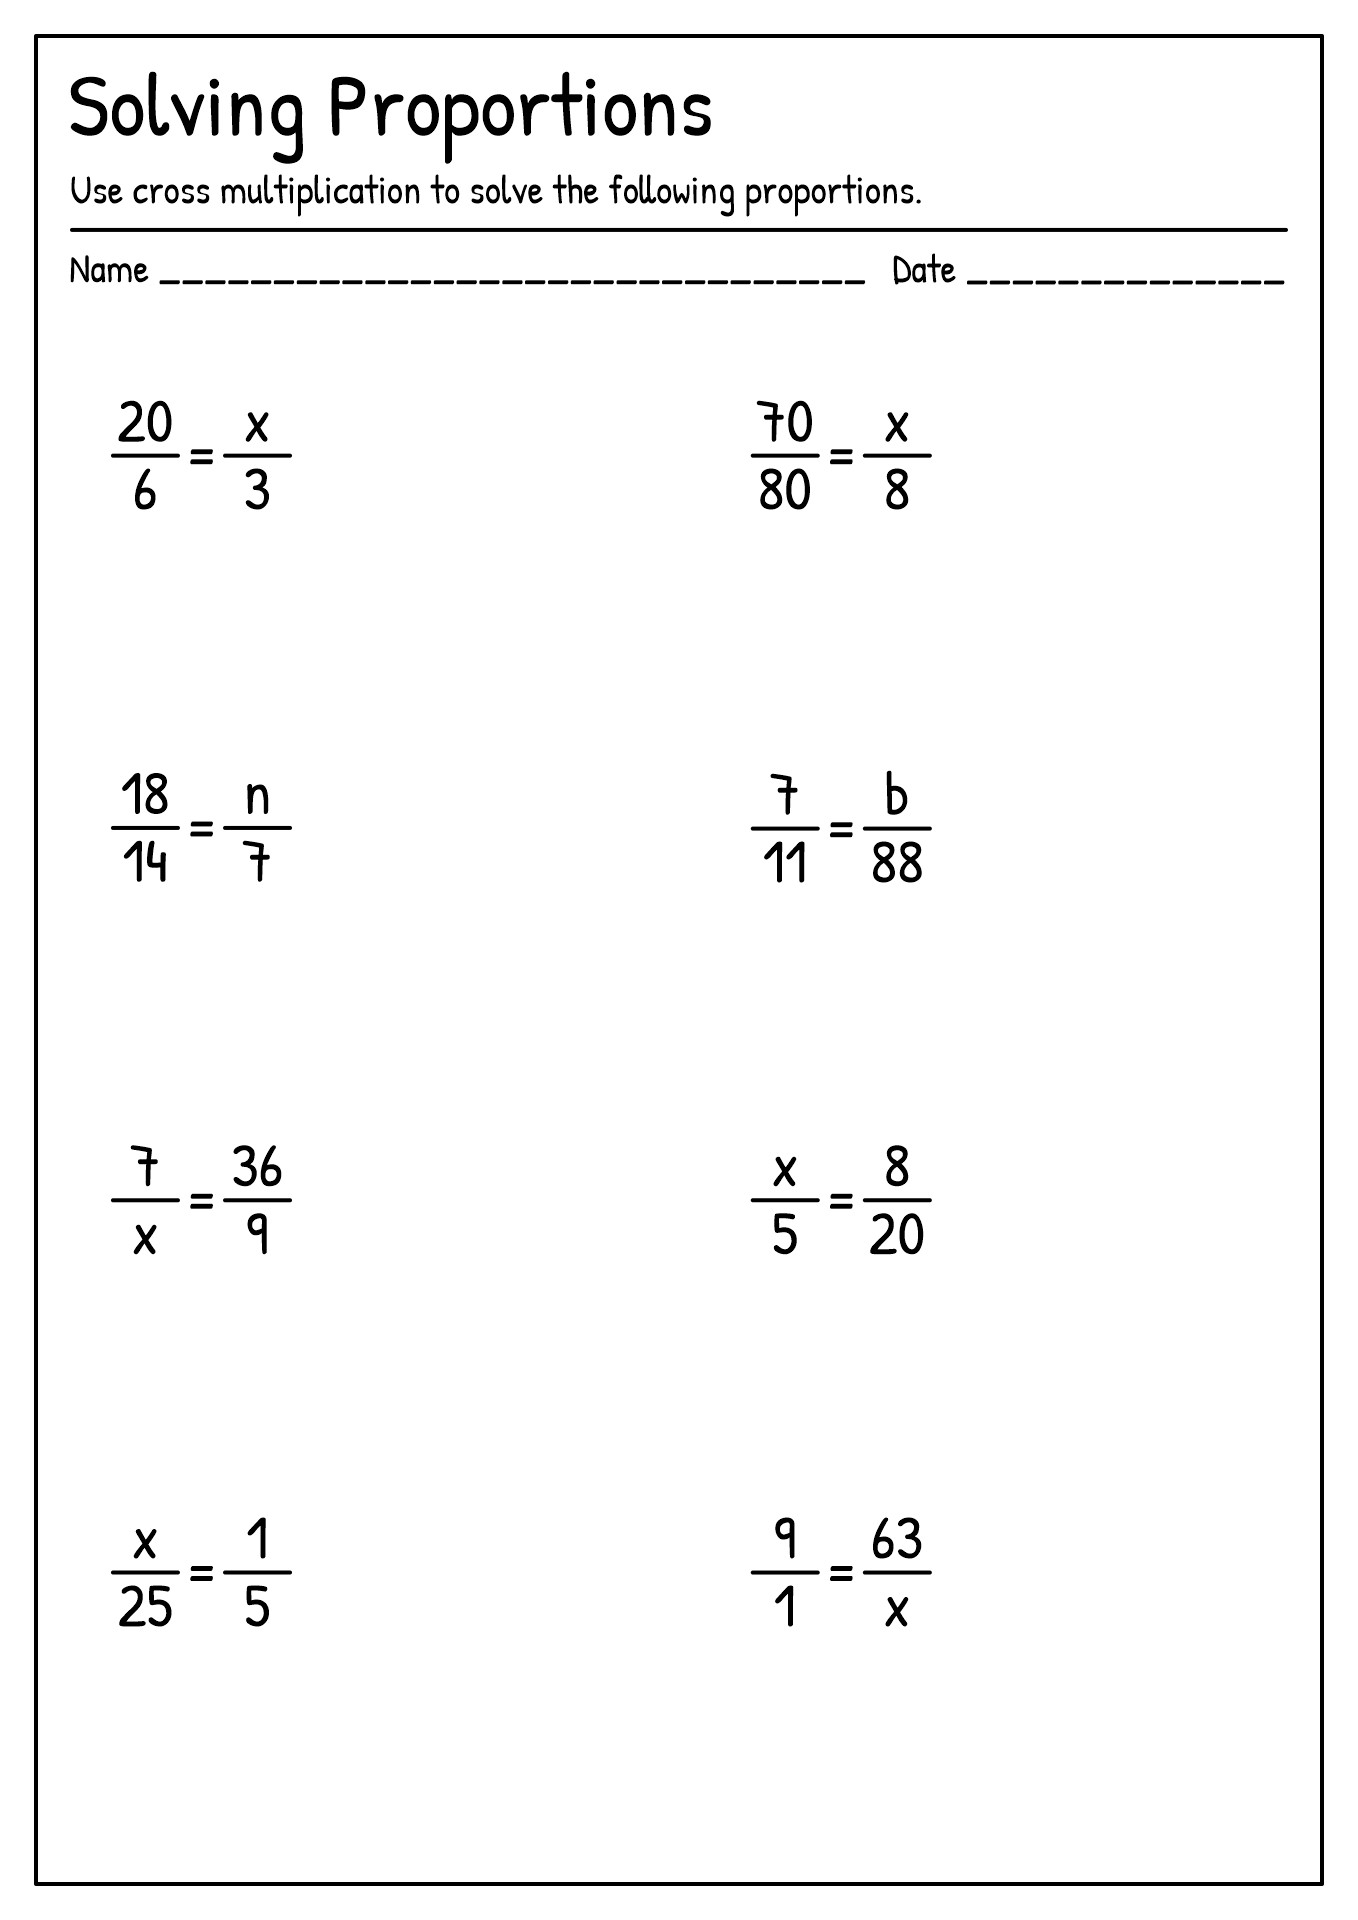 Solving Ratios and Proportions Worksheets